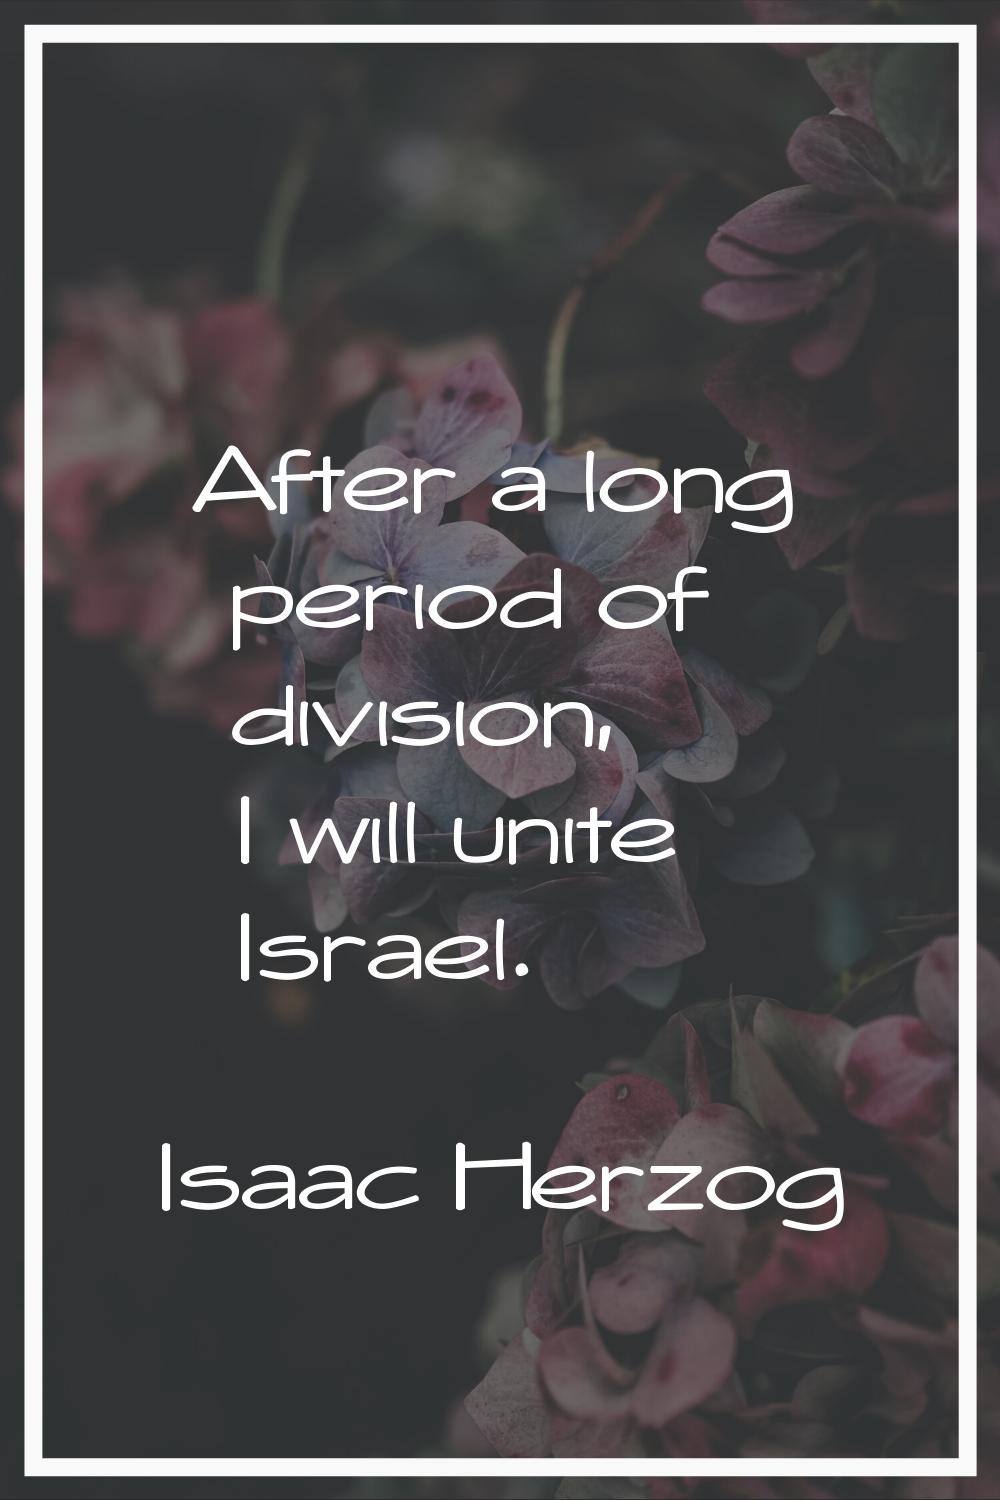 After a long period of division, I will unite Israel.